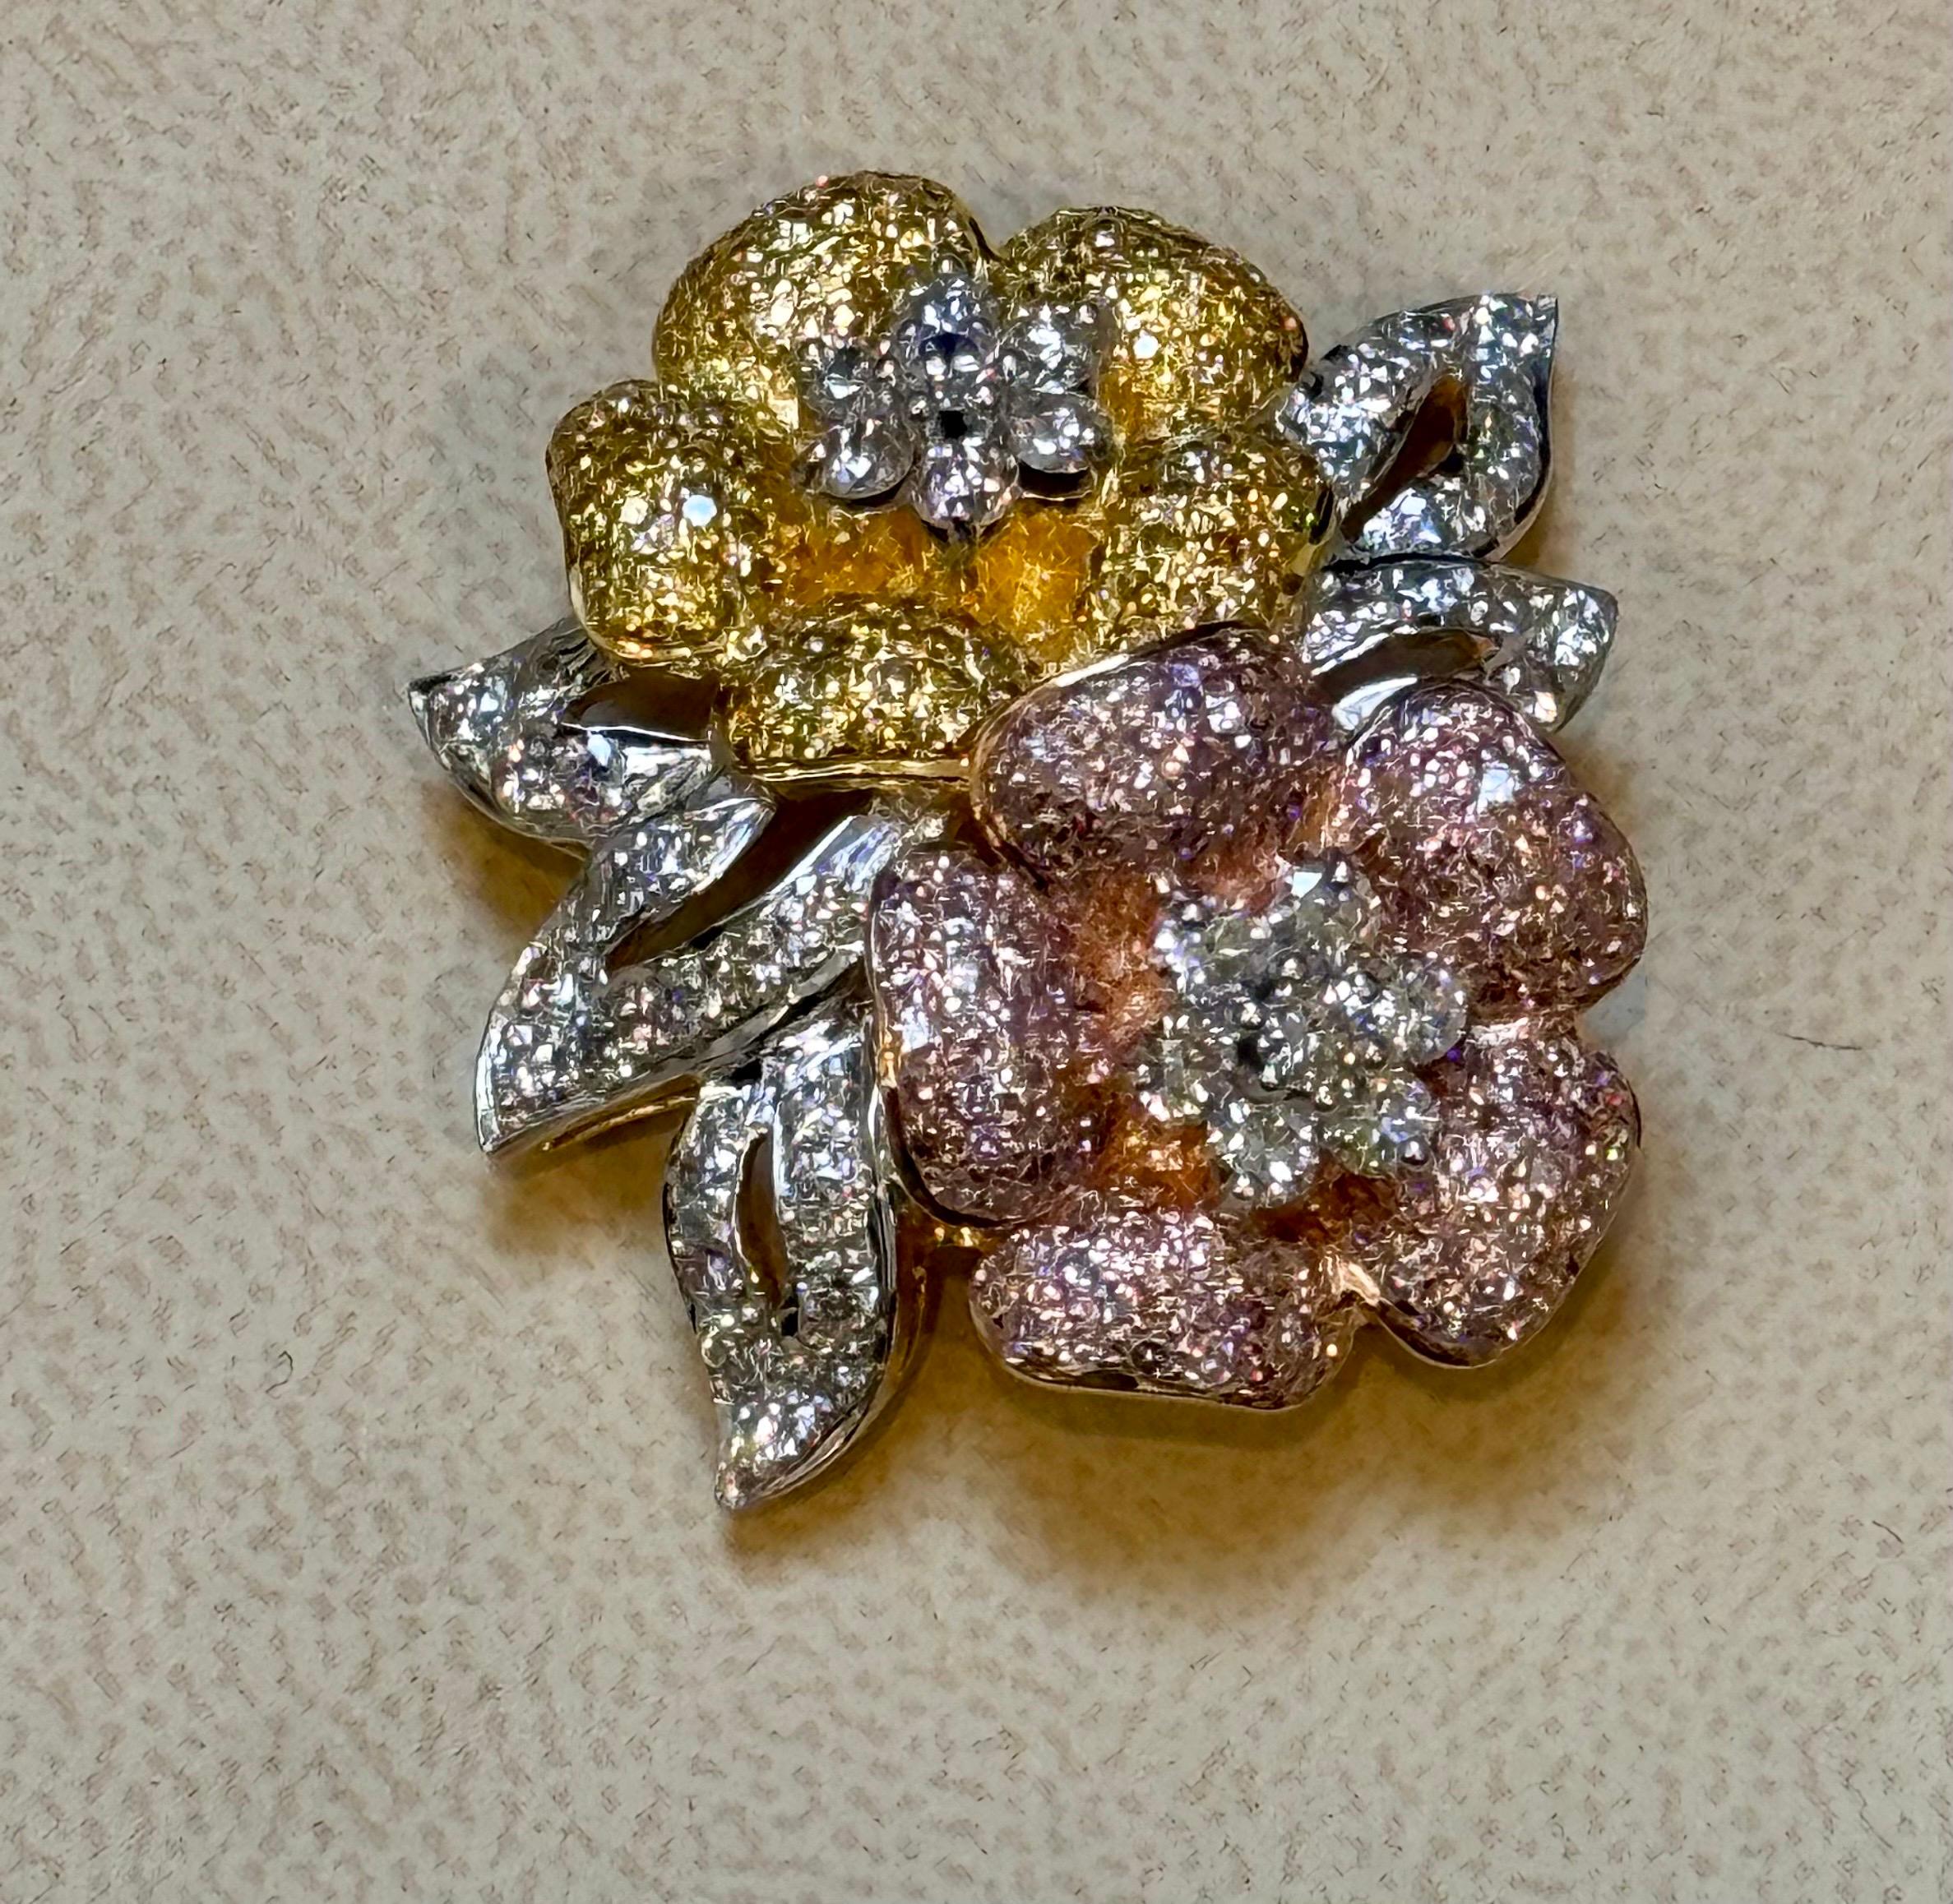 4 Ct Natural Fancy Color Diamond Flower Pin/ Brooch in 18 Kt Multi Color Gold  In Excellent Condition For Sale In New York, NY